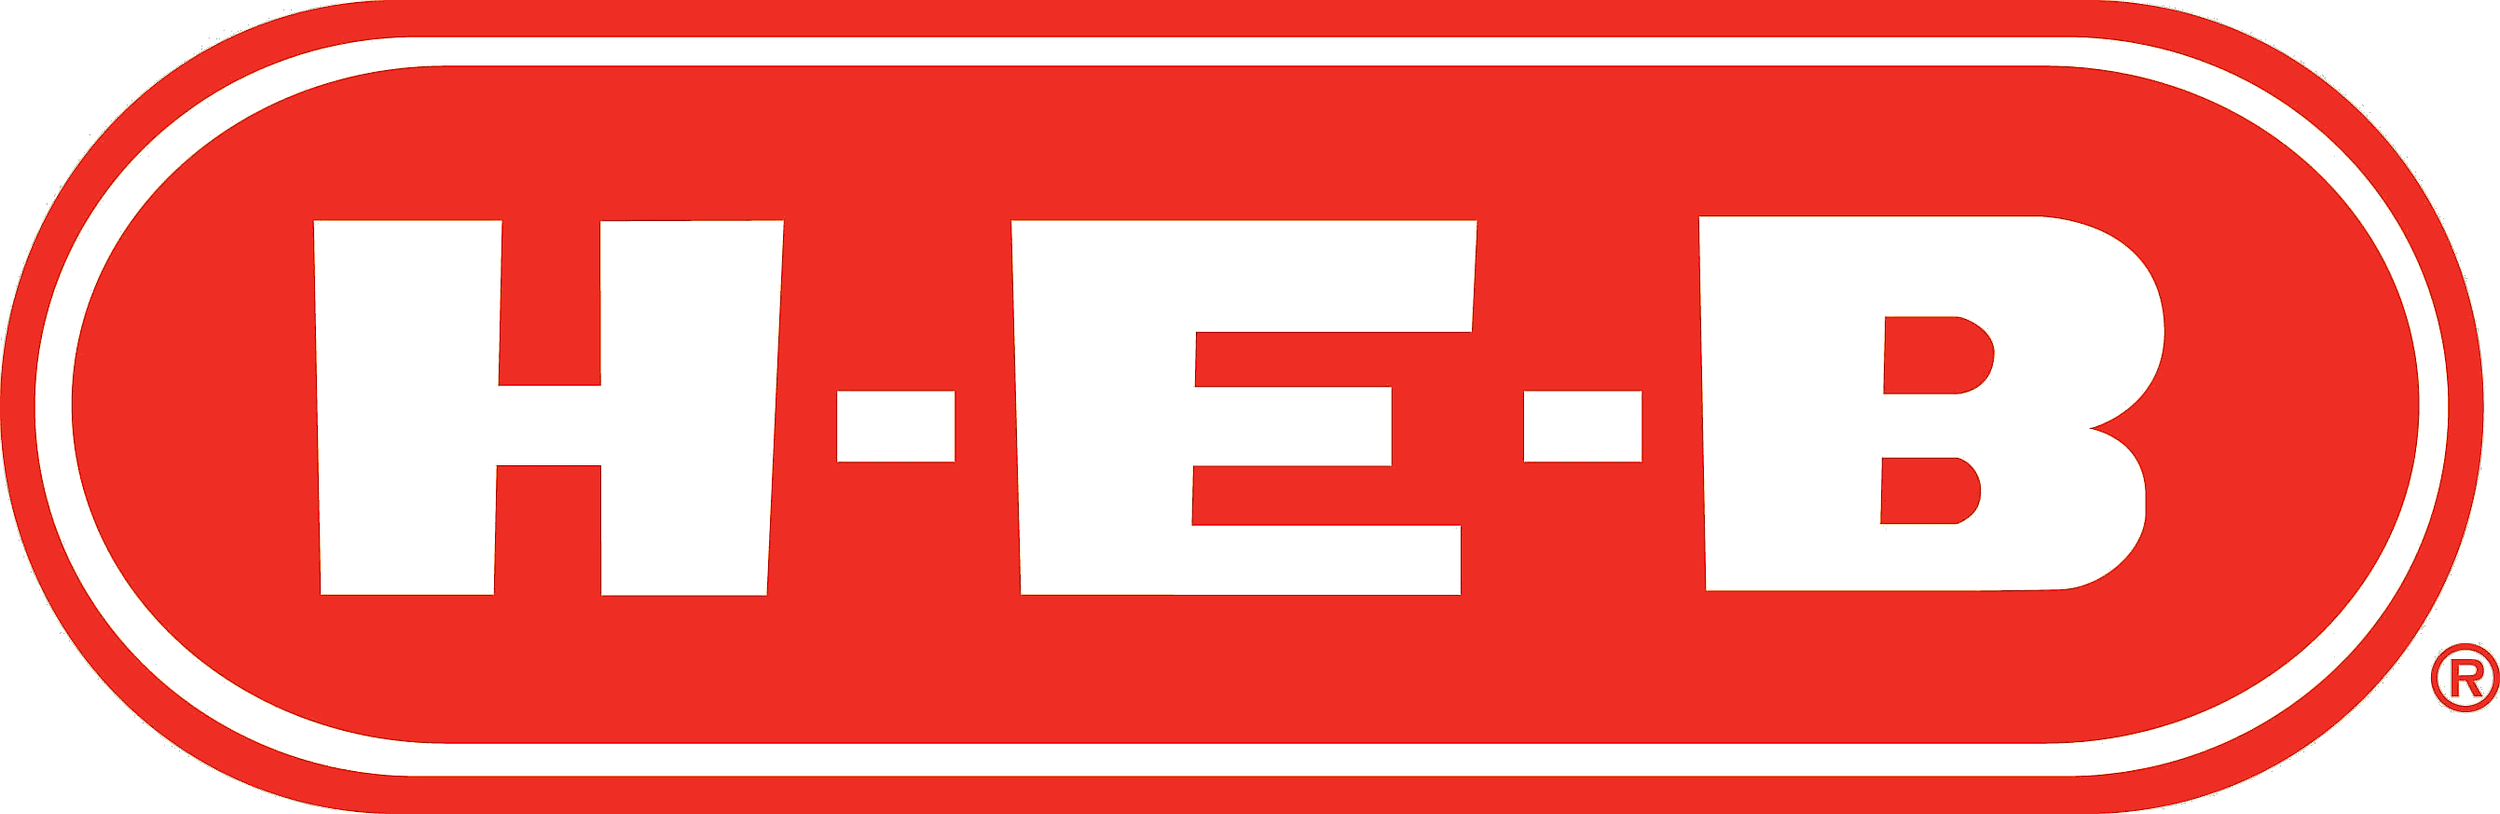 HEB.png